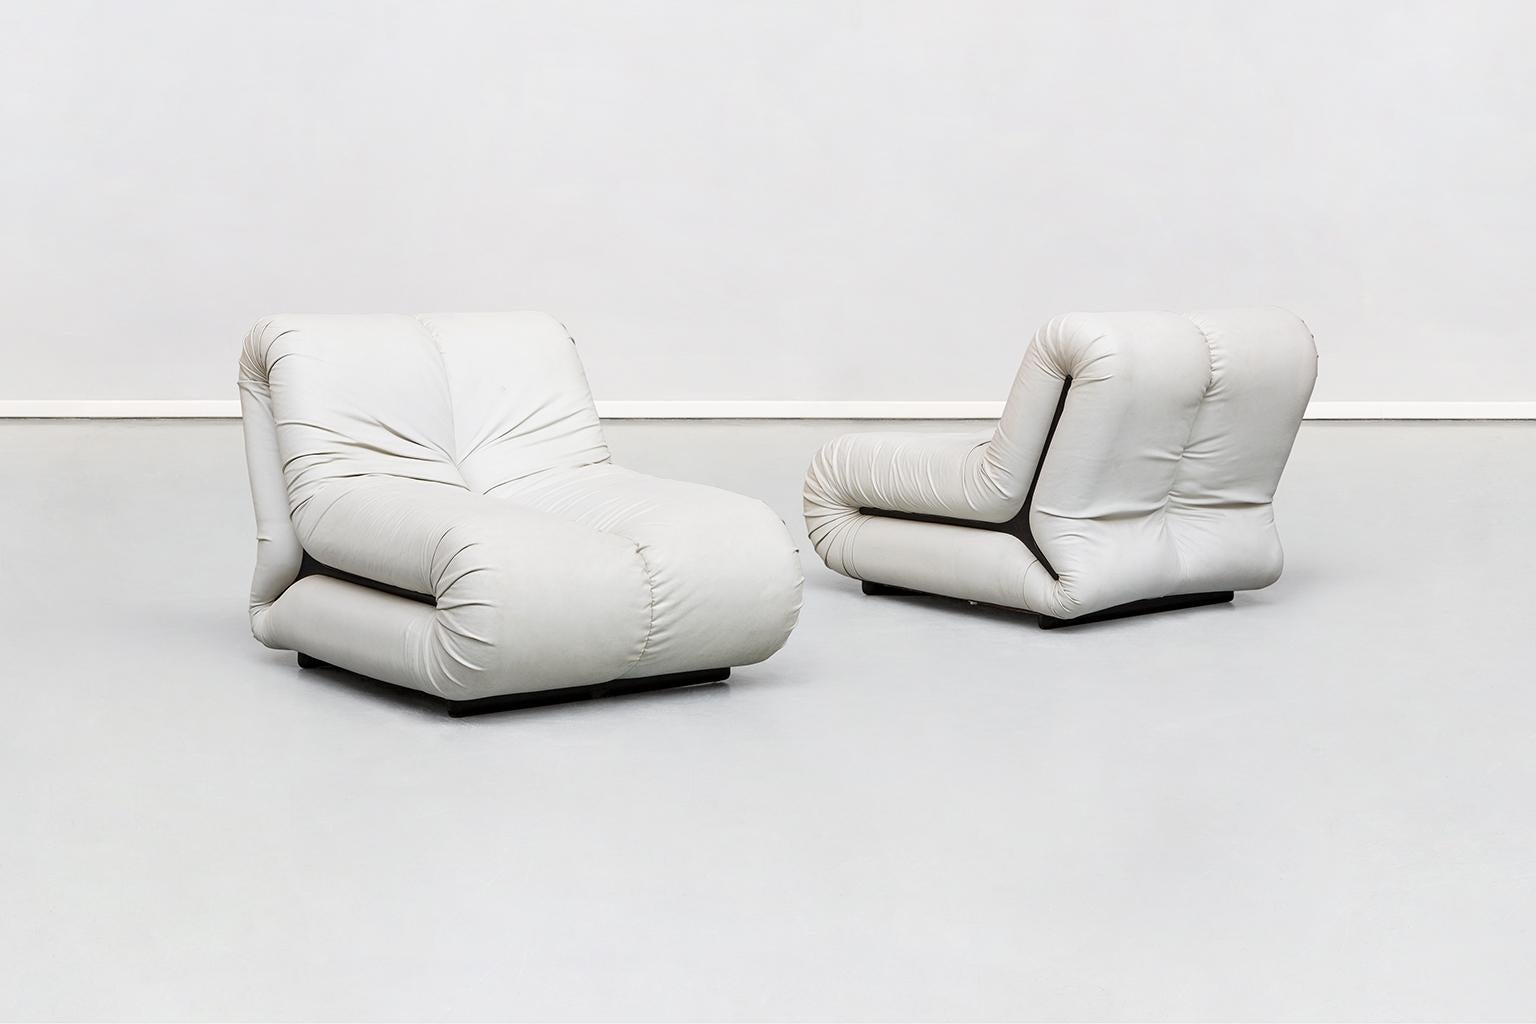 Italian space age, white leather Pagrù armchairs, by 1P Italy, 1968
Extremely rare couple of white leather armchairs Pagrú, produced by 1P, Italy, in 1968. Entirely covered with their original brilliant white leather, with a black profile on each